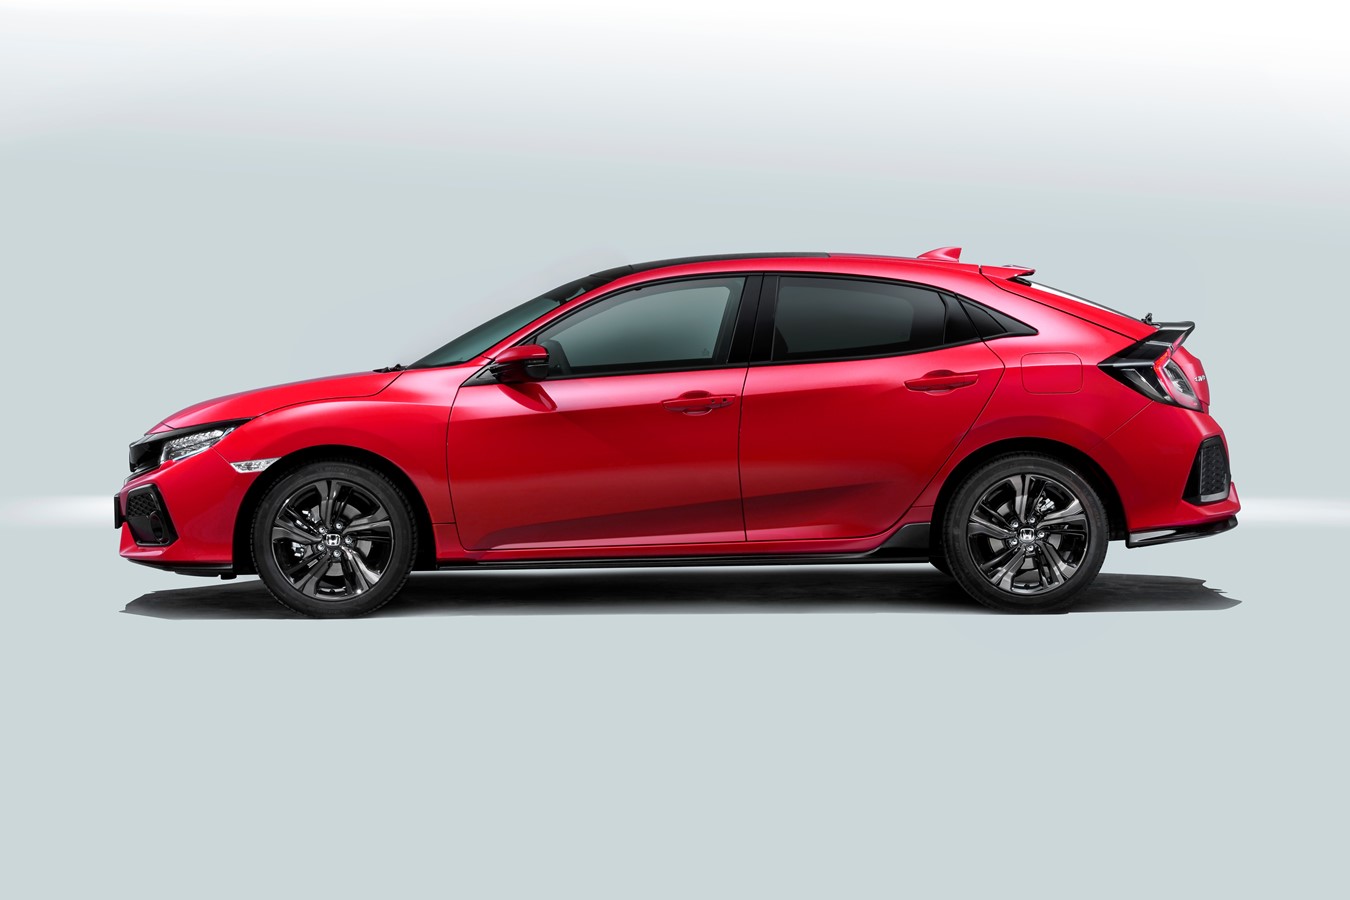 New UK-built Honda Civic unveiled and all set for export success   